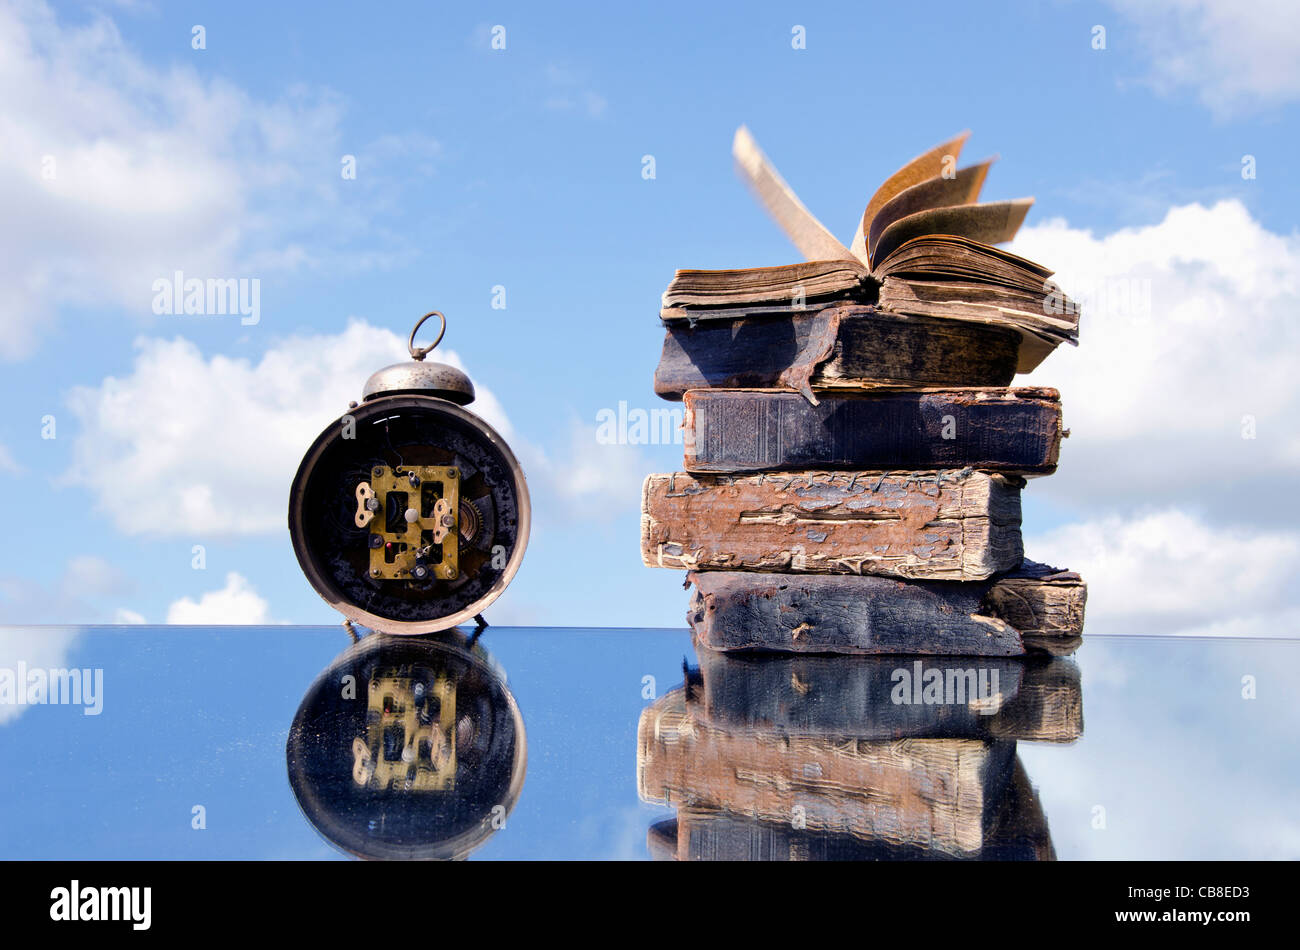 vintage books and old clock on mirror and sky Stock Photo